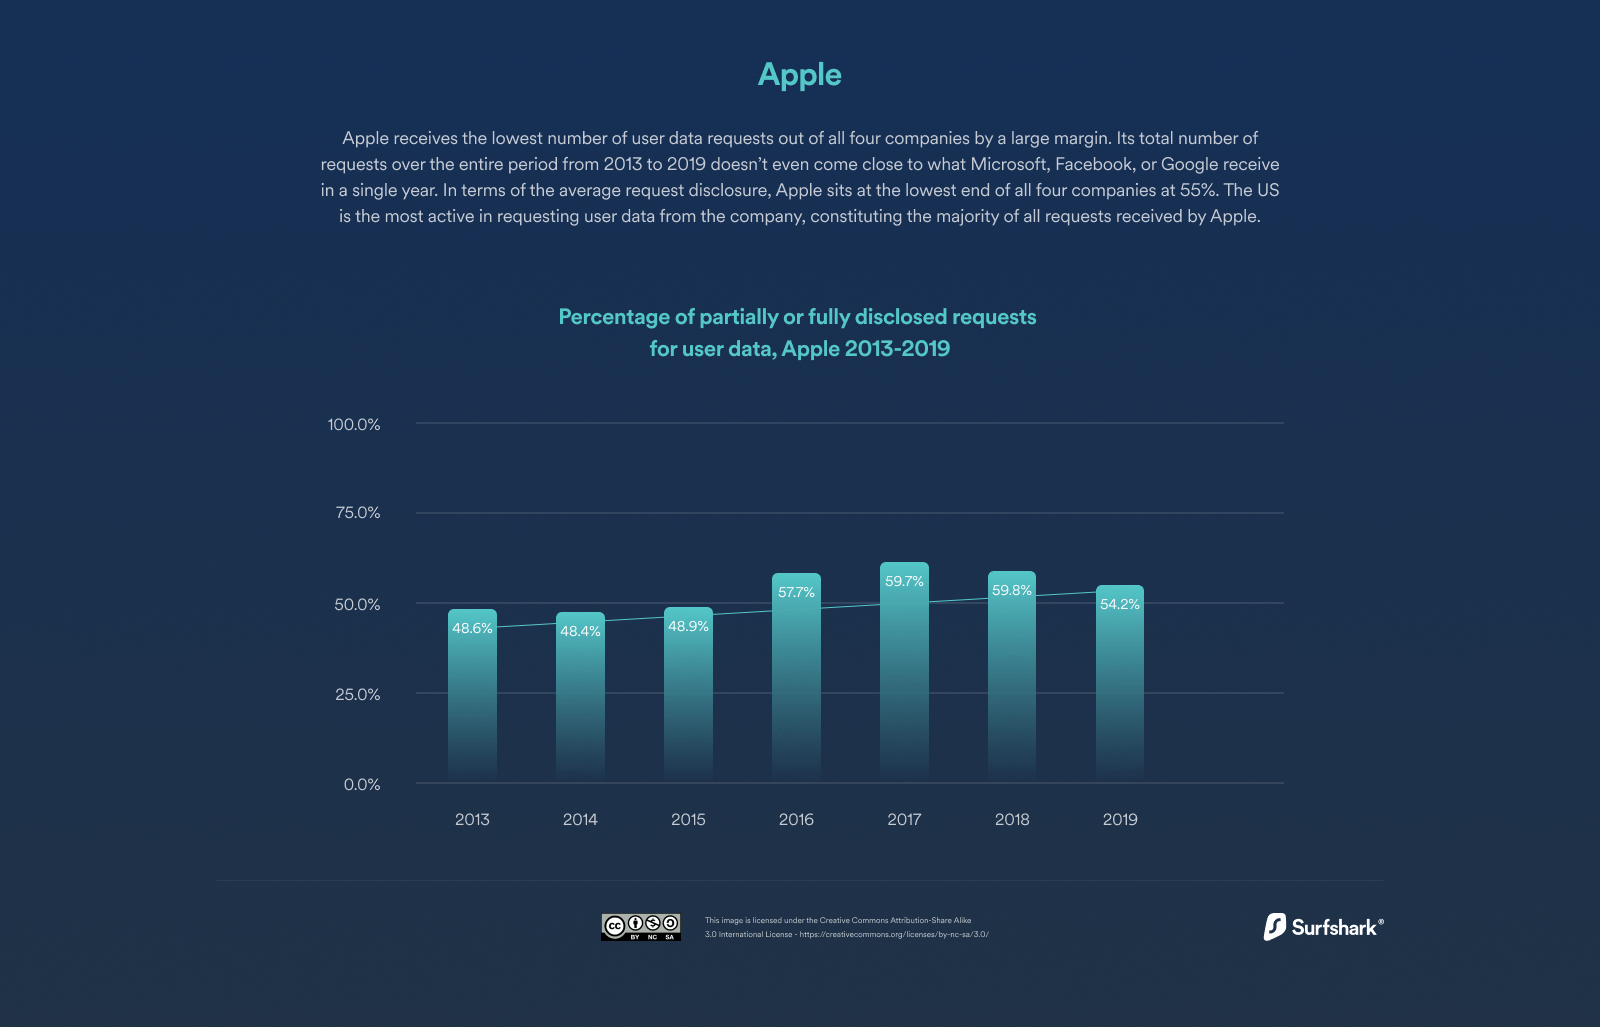 Percentage of partially or fully disclosed requests for user data, Apple 2013-2019